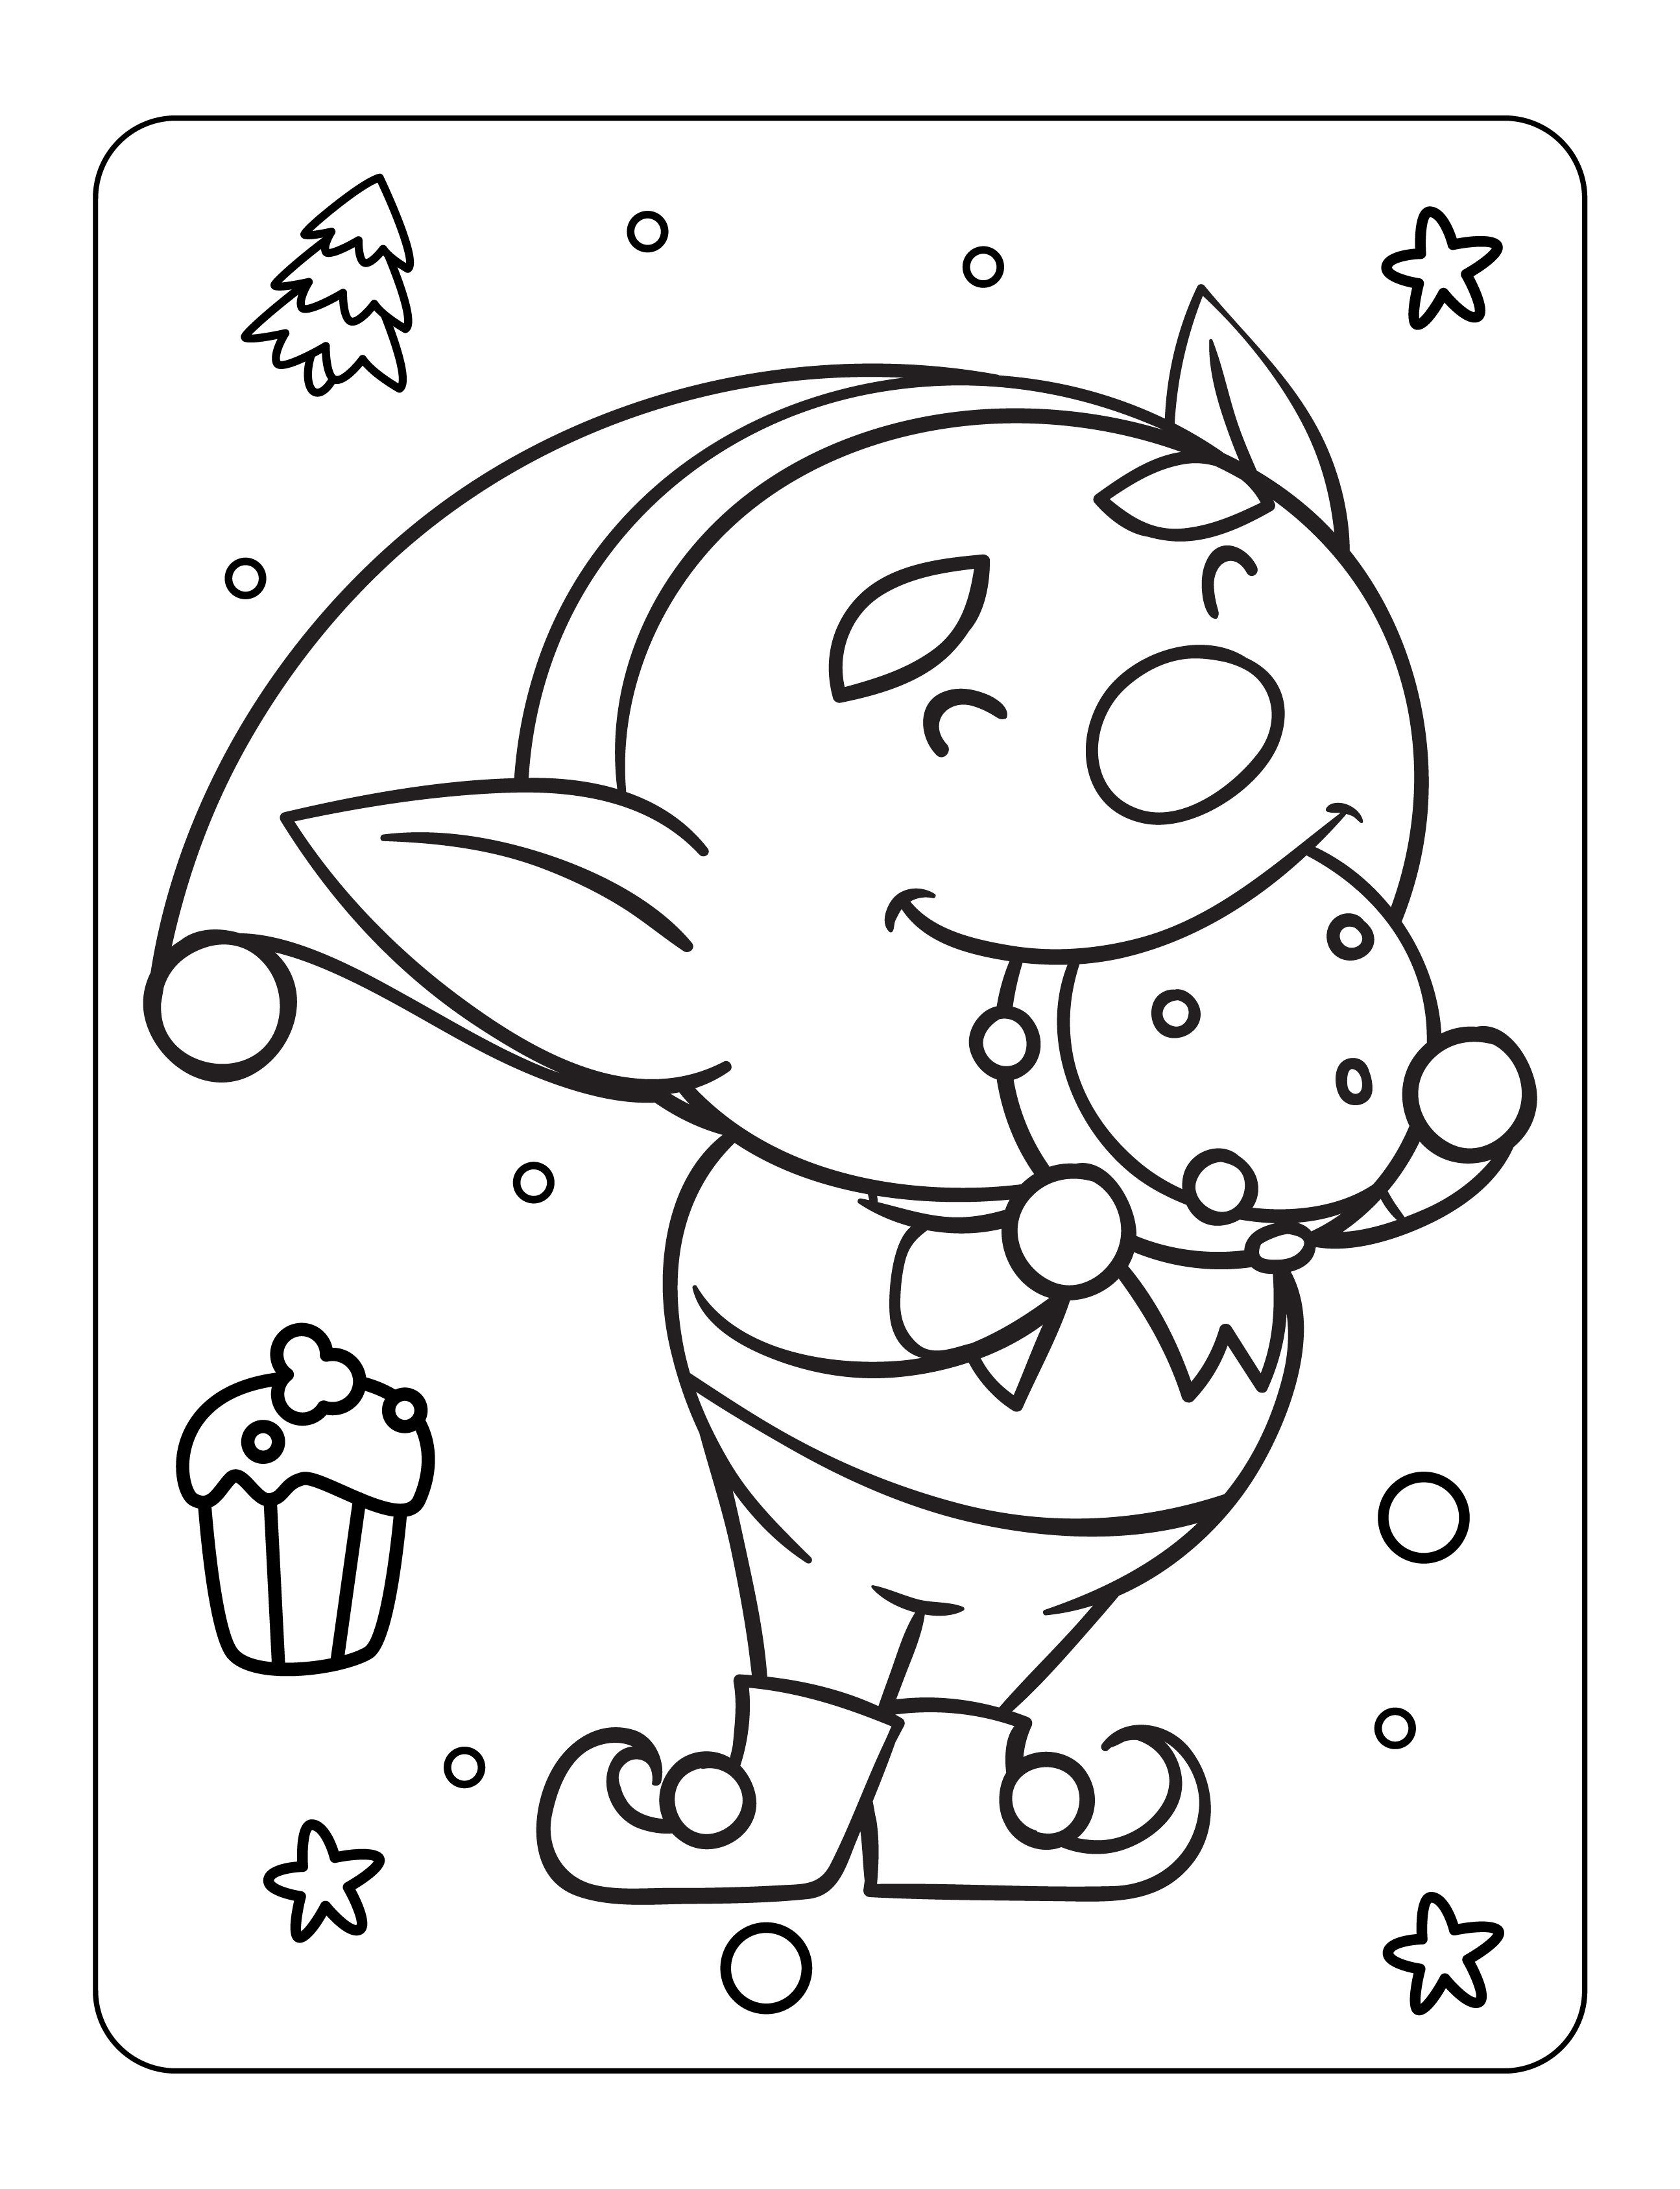 Elf coloring pages free christmas elves coloring pages